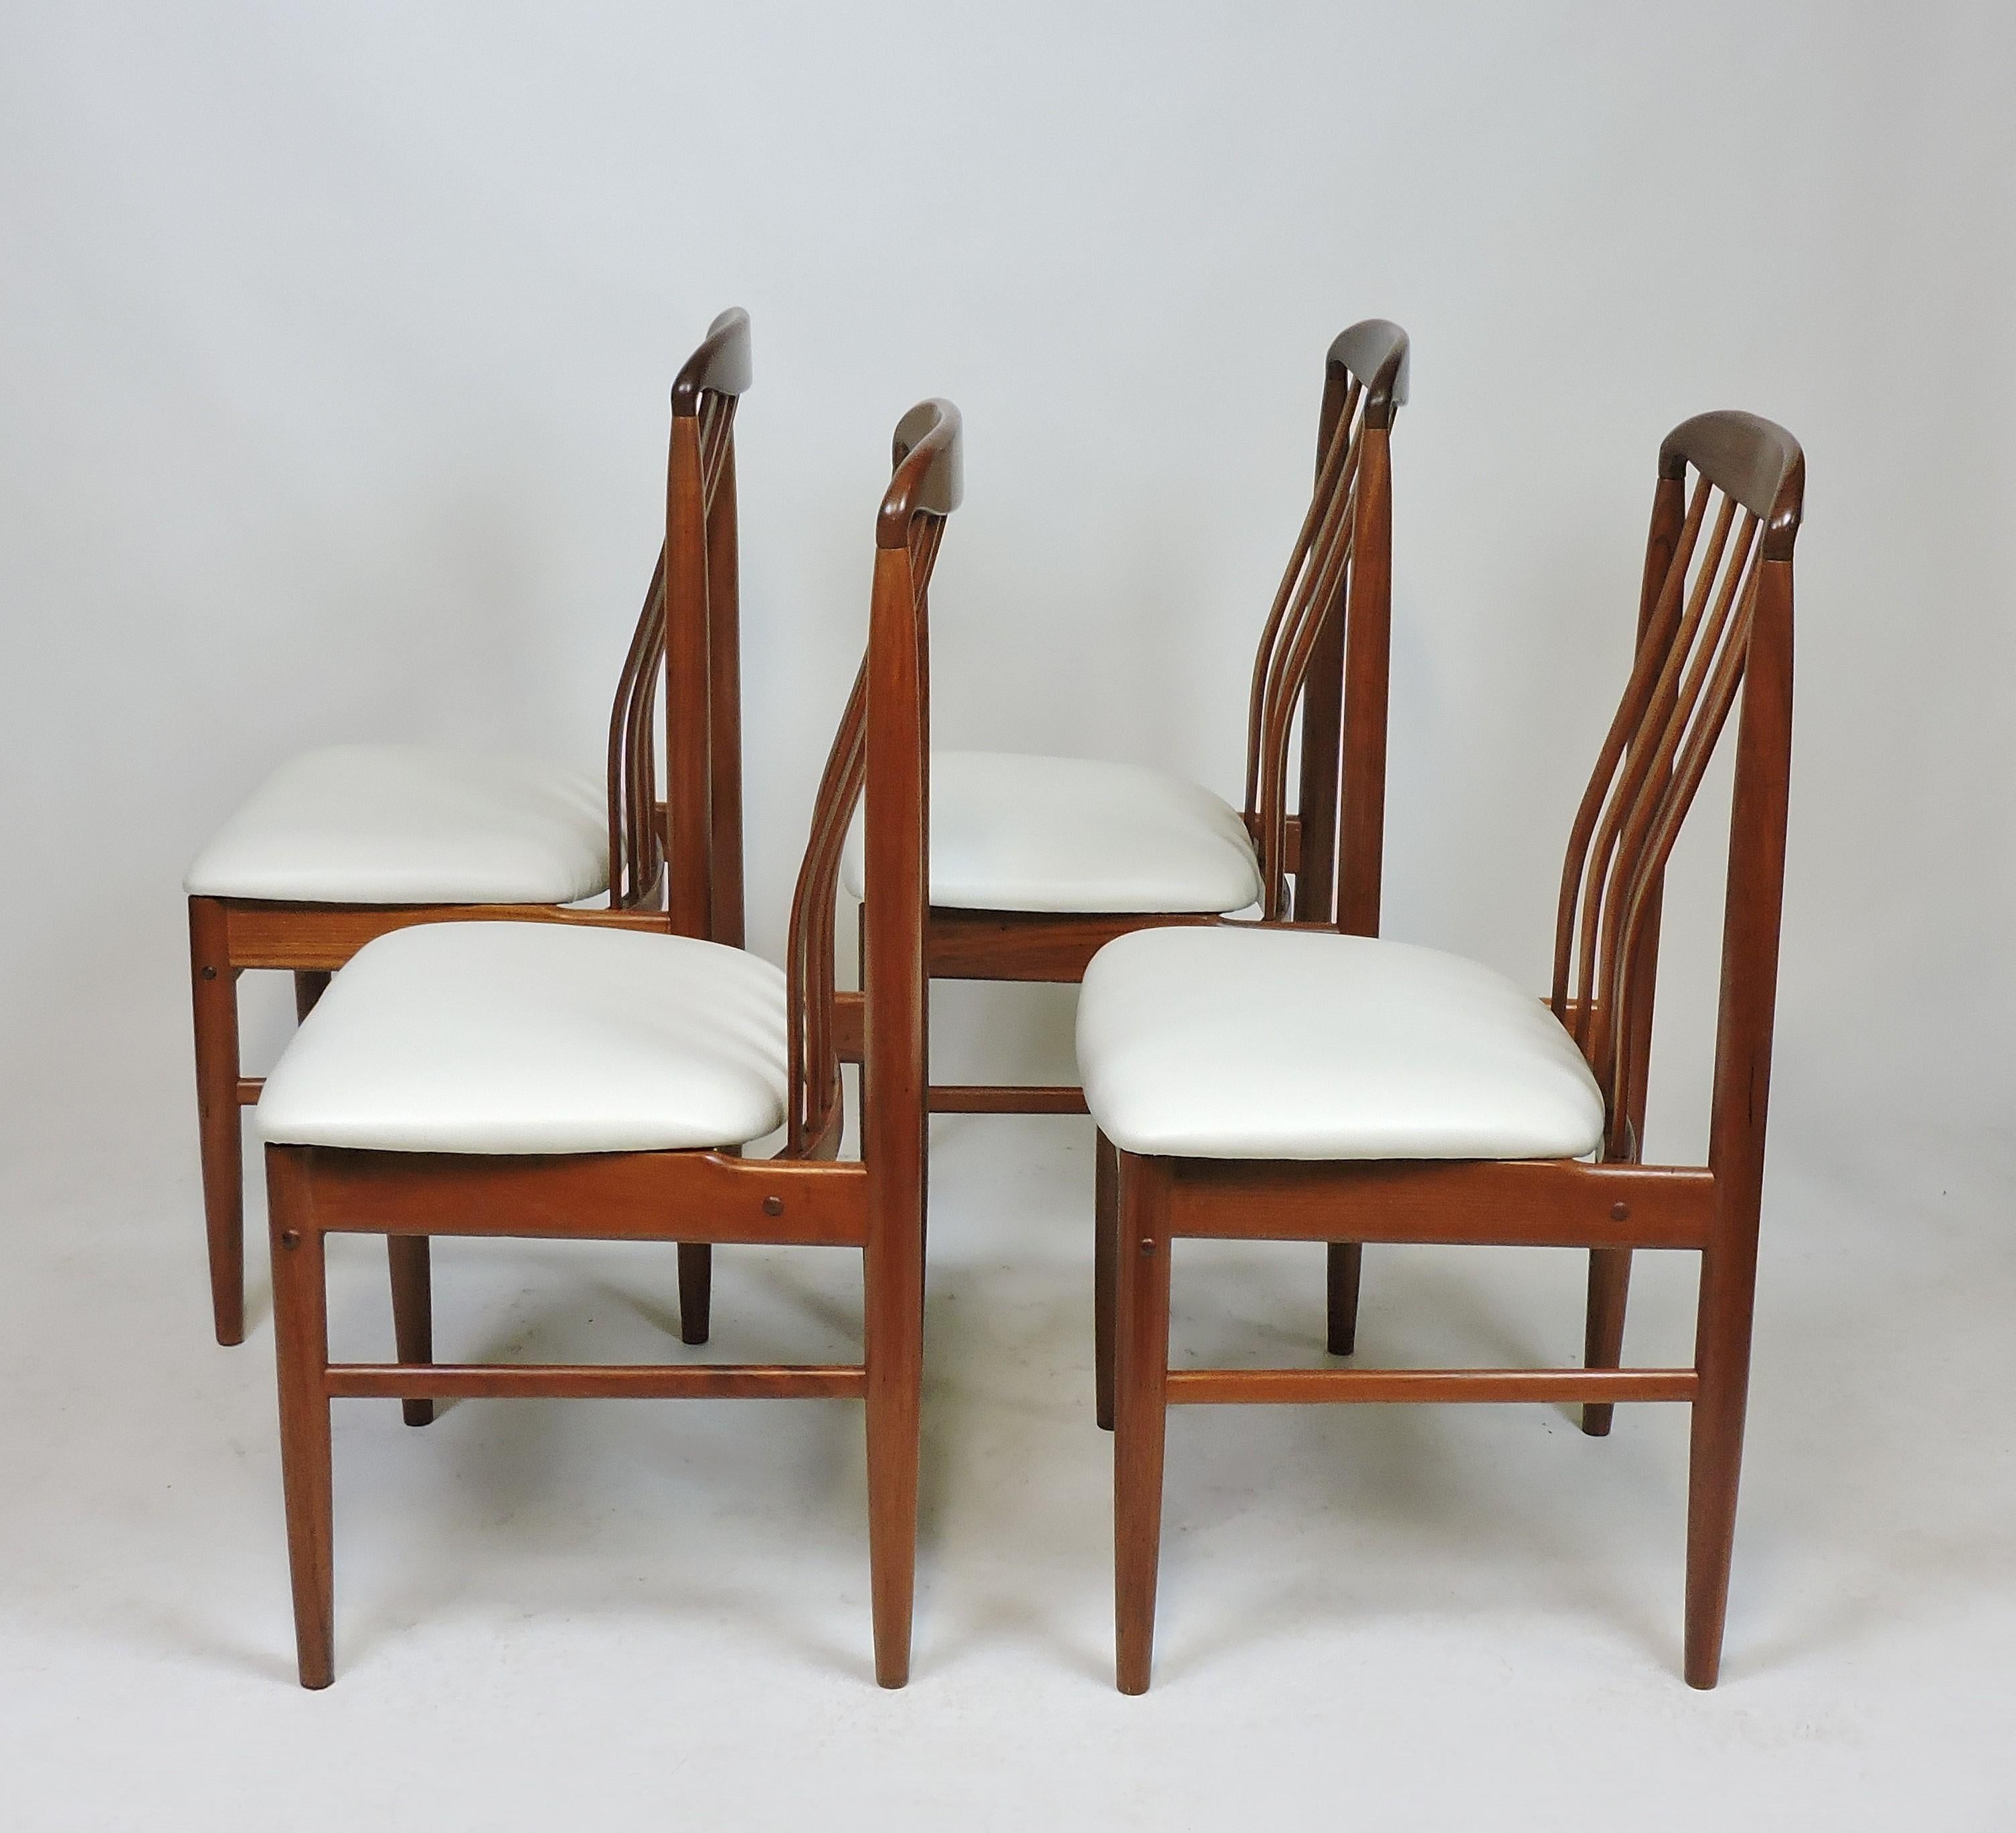 benny linden chairs